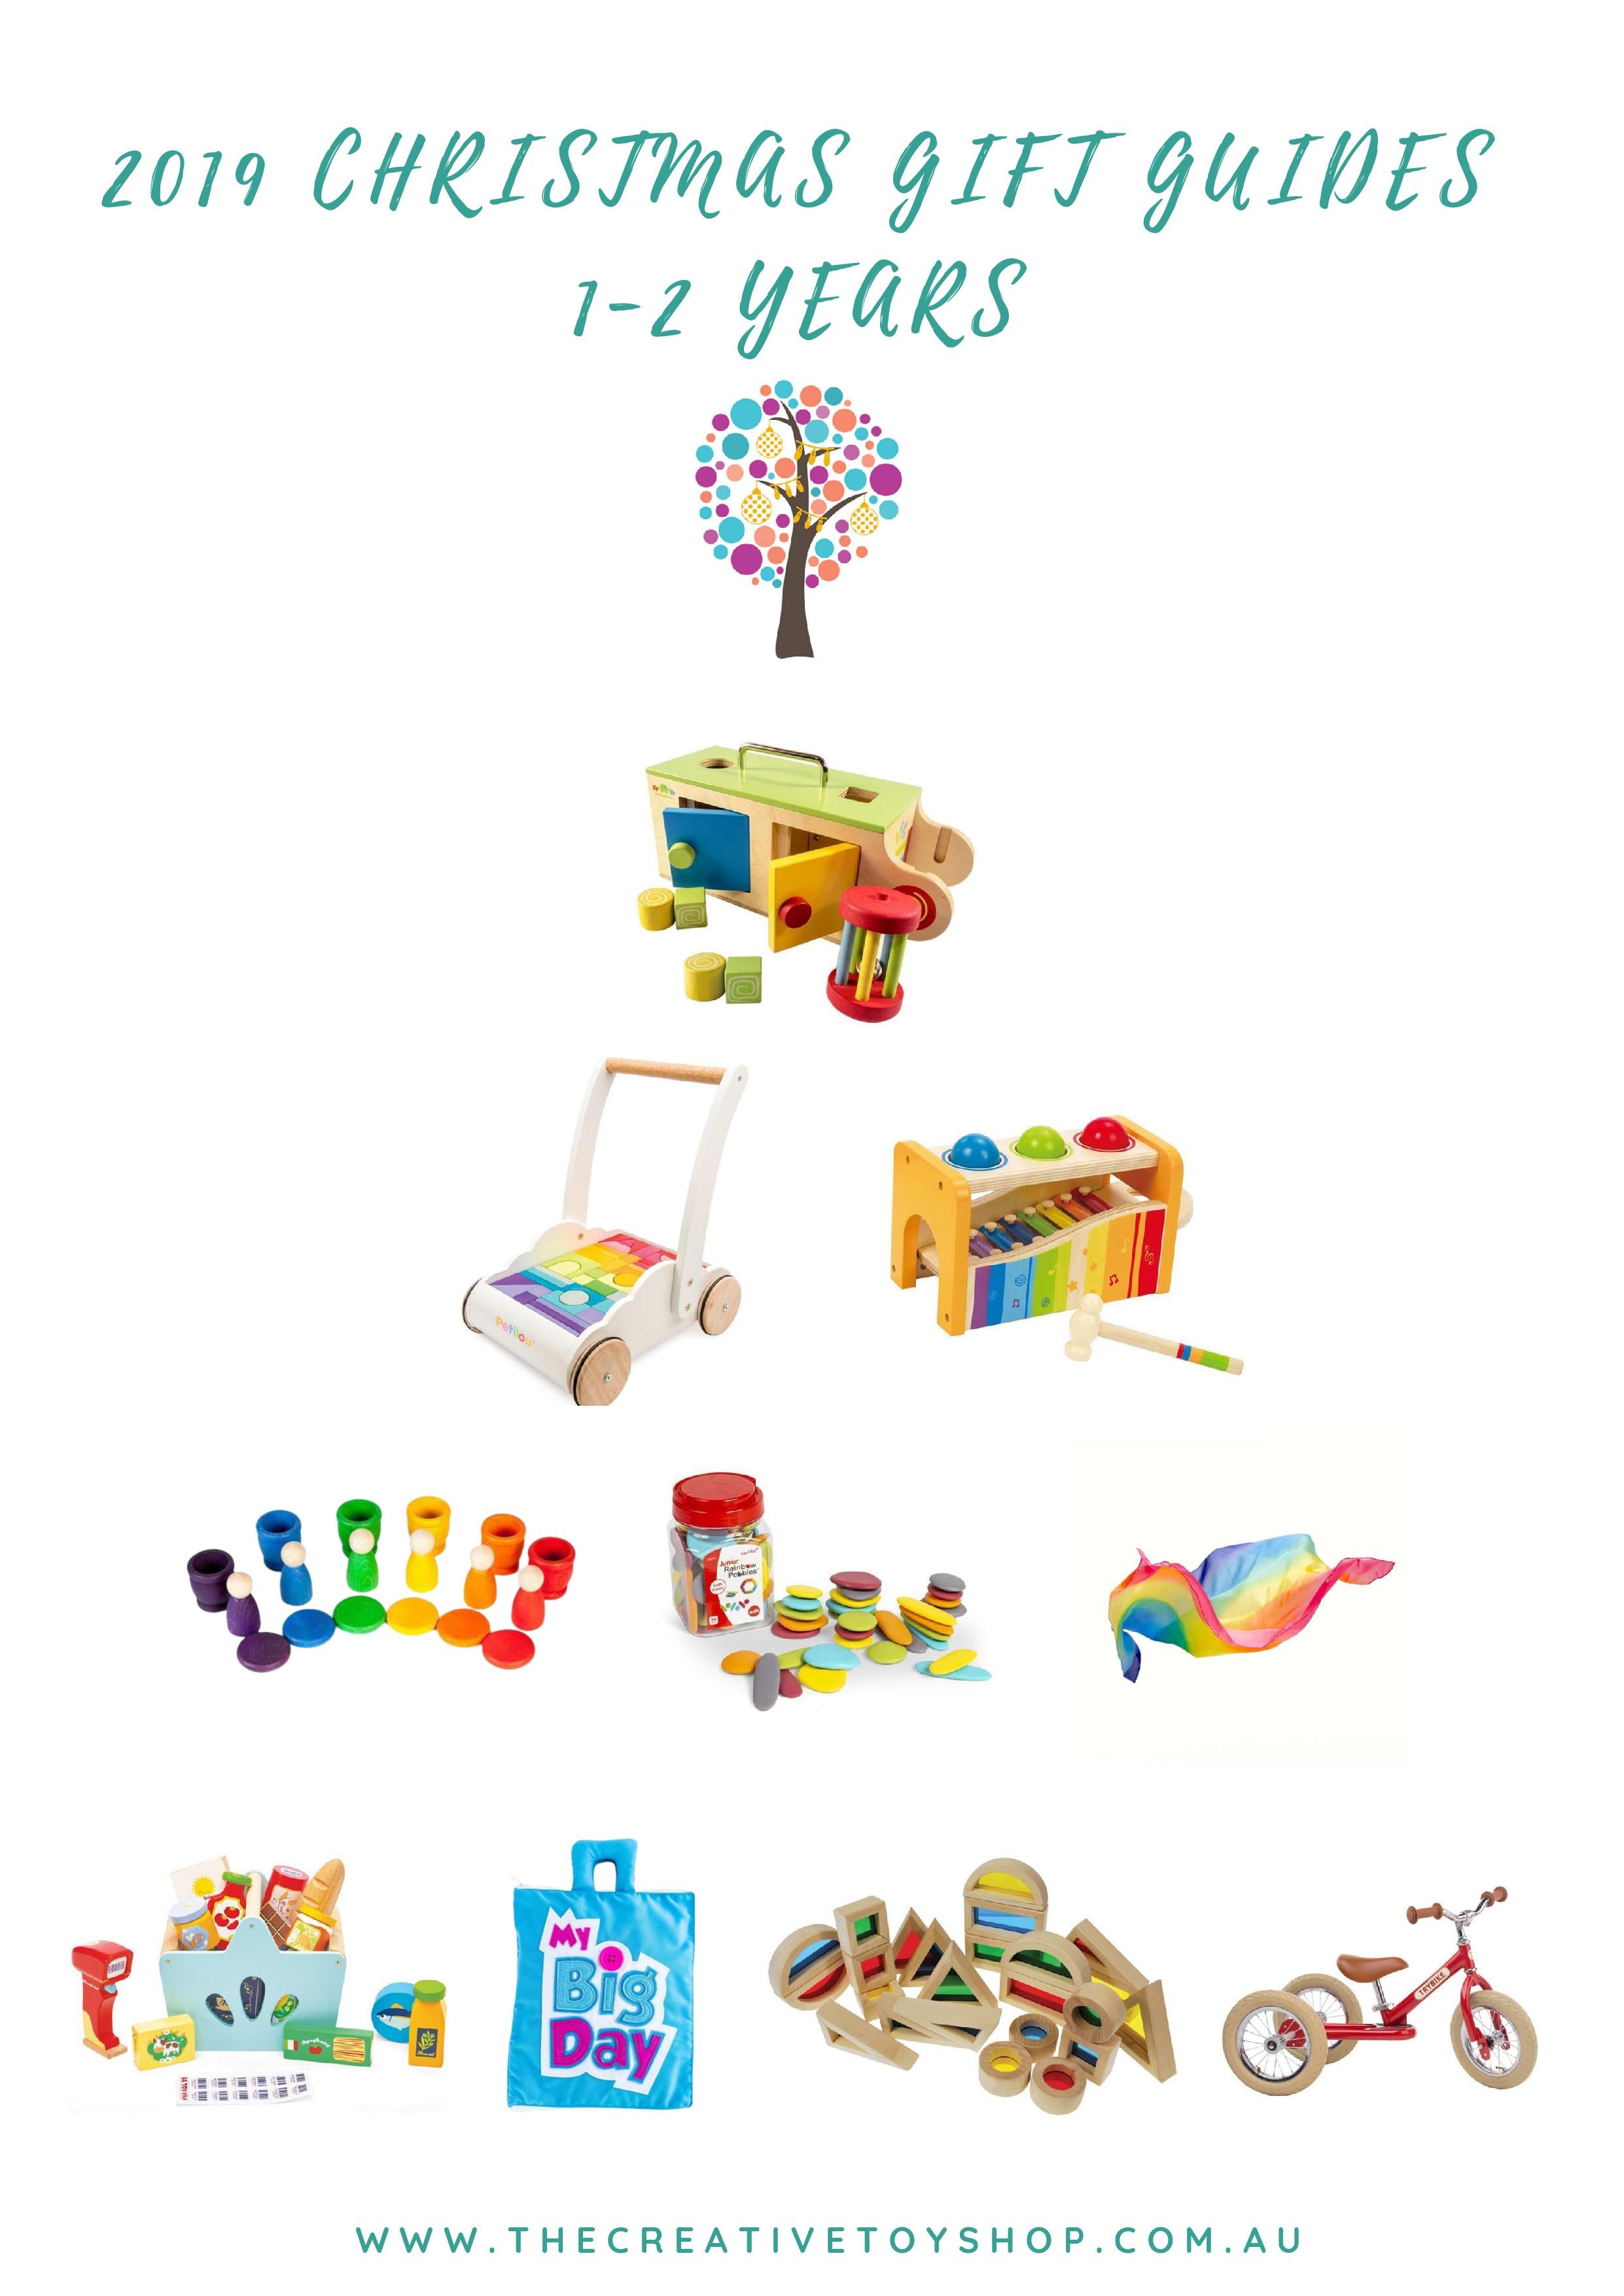 The Creative Toy Shop 2019 Christmas Gift Guide 1-2 years